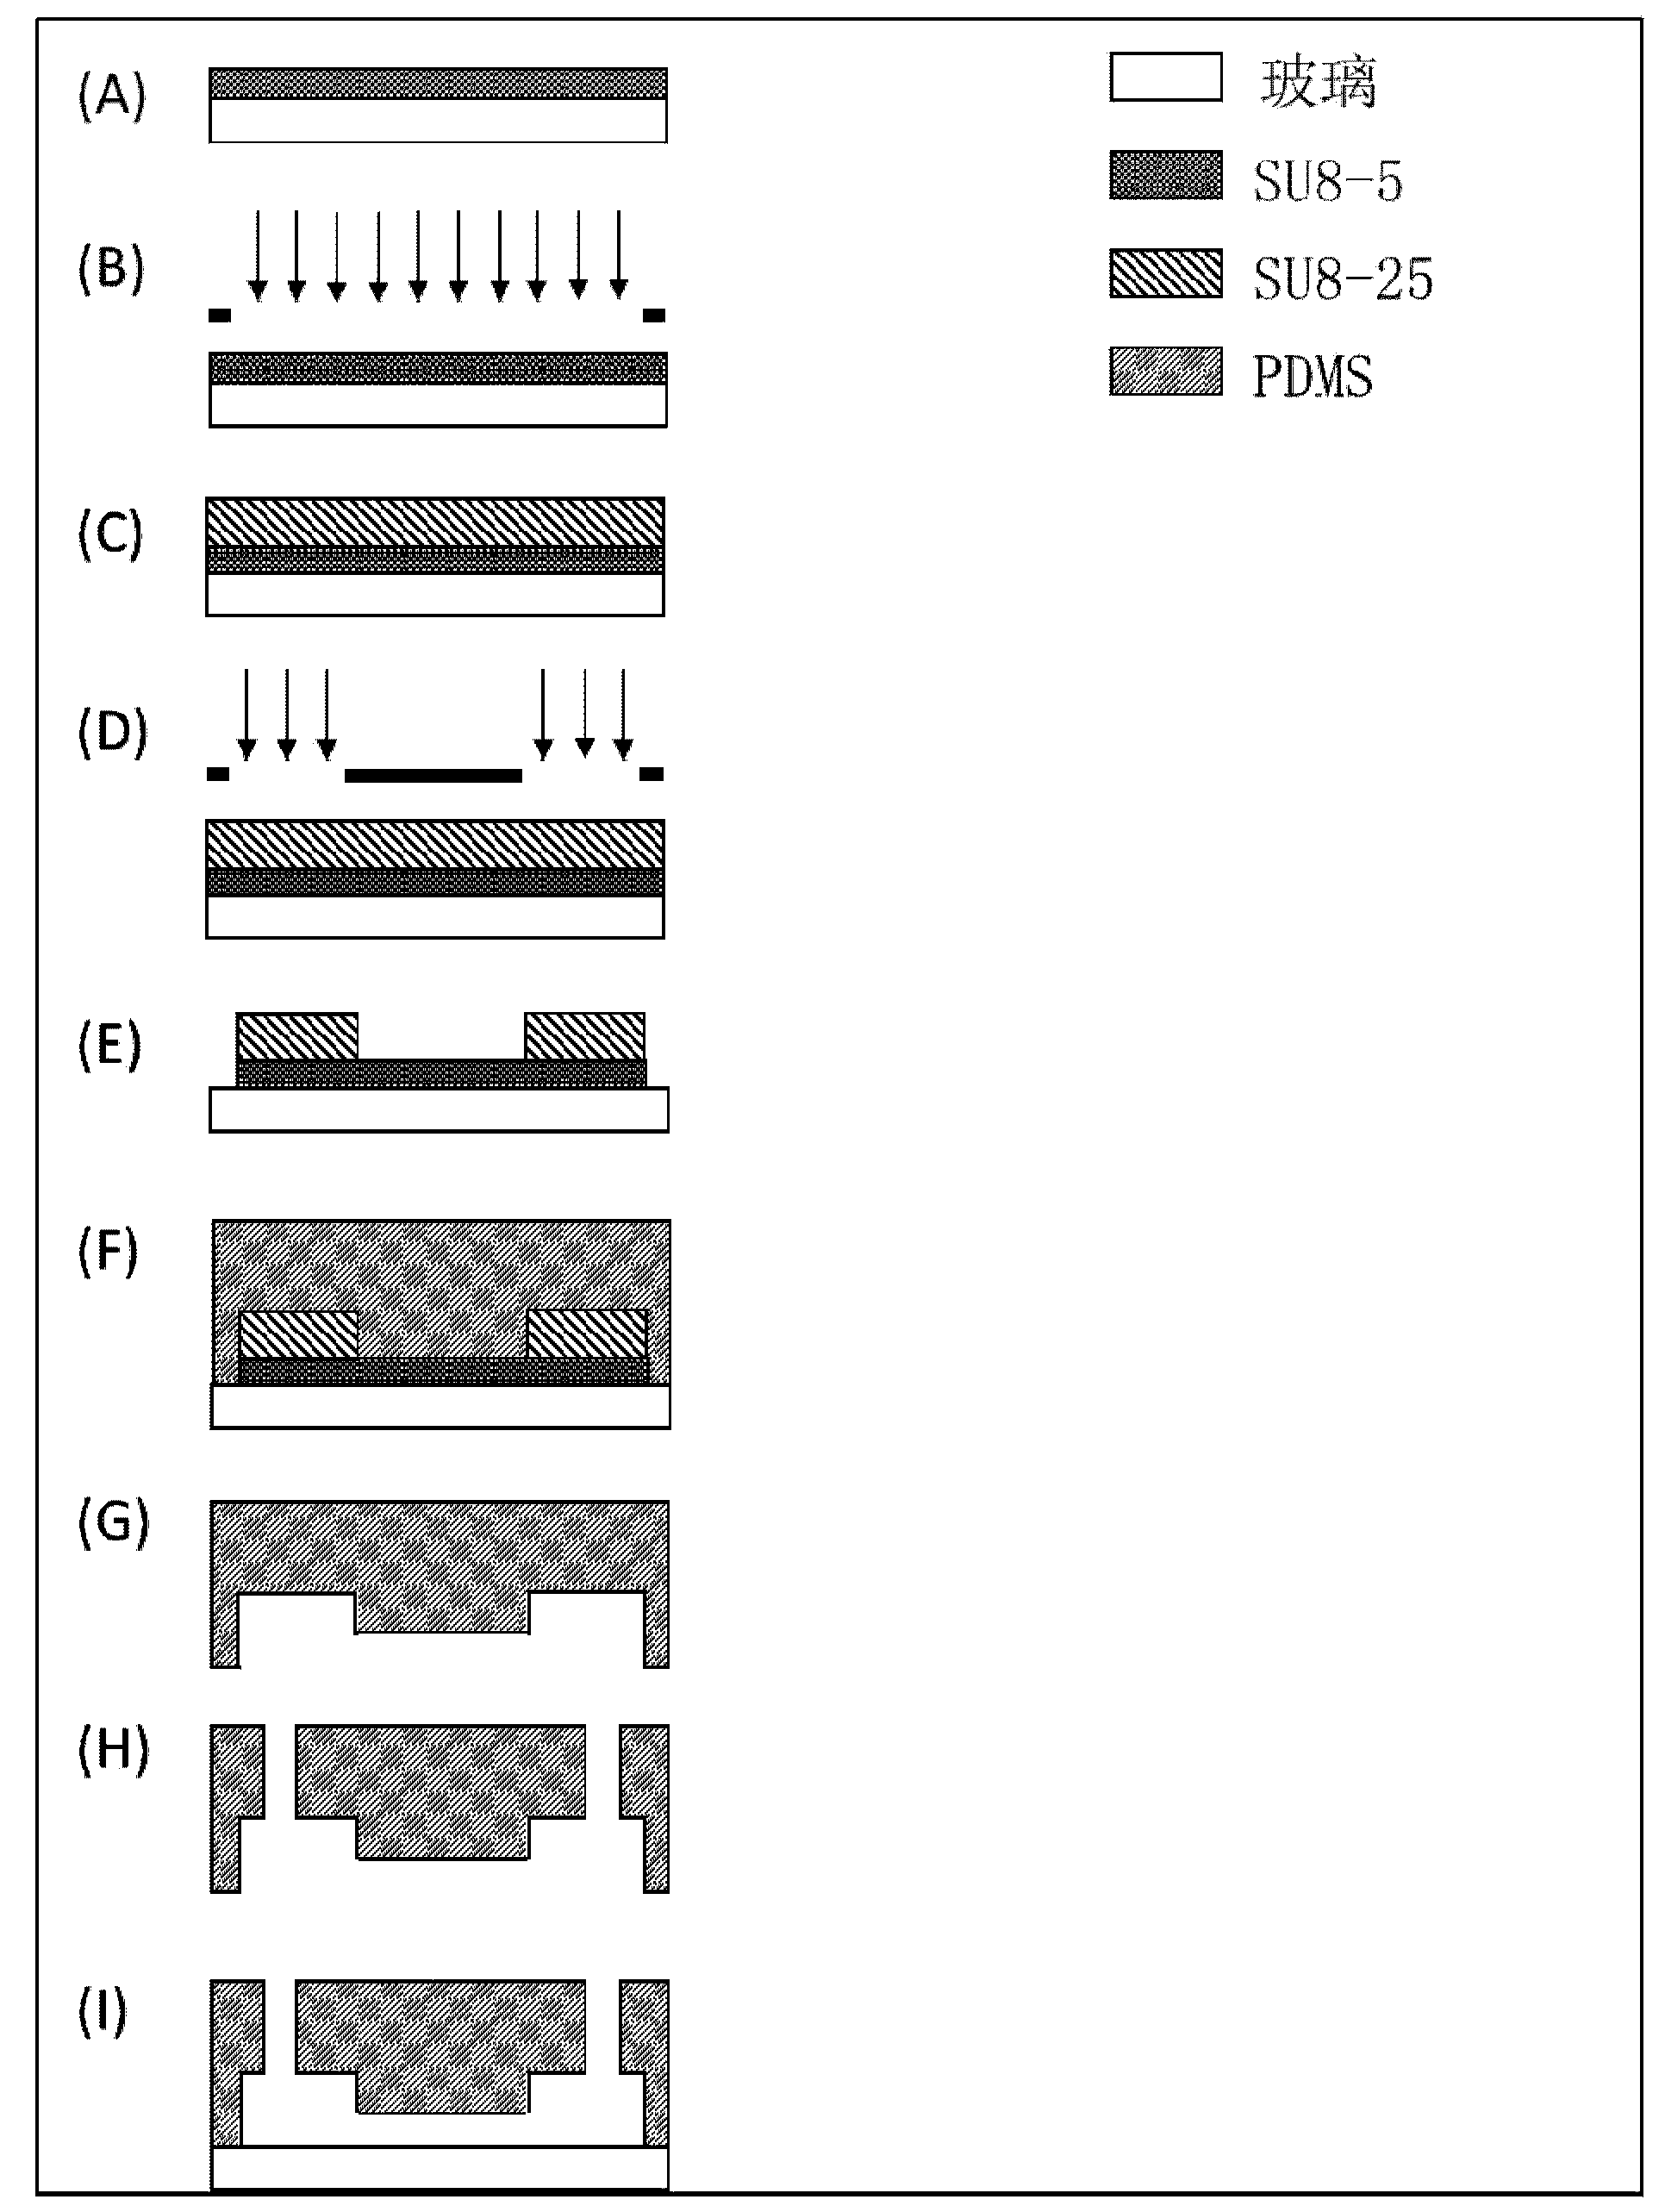 System for simultaneous representation of single cell Young's modulus and cell membrane specific capacitance